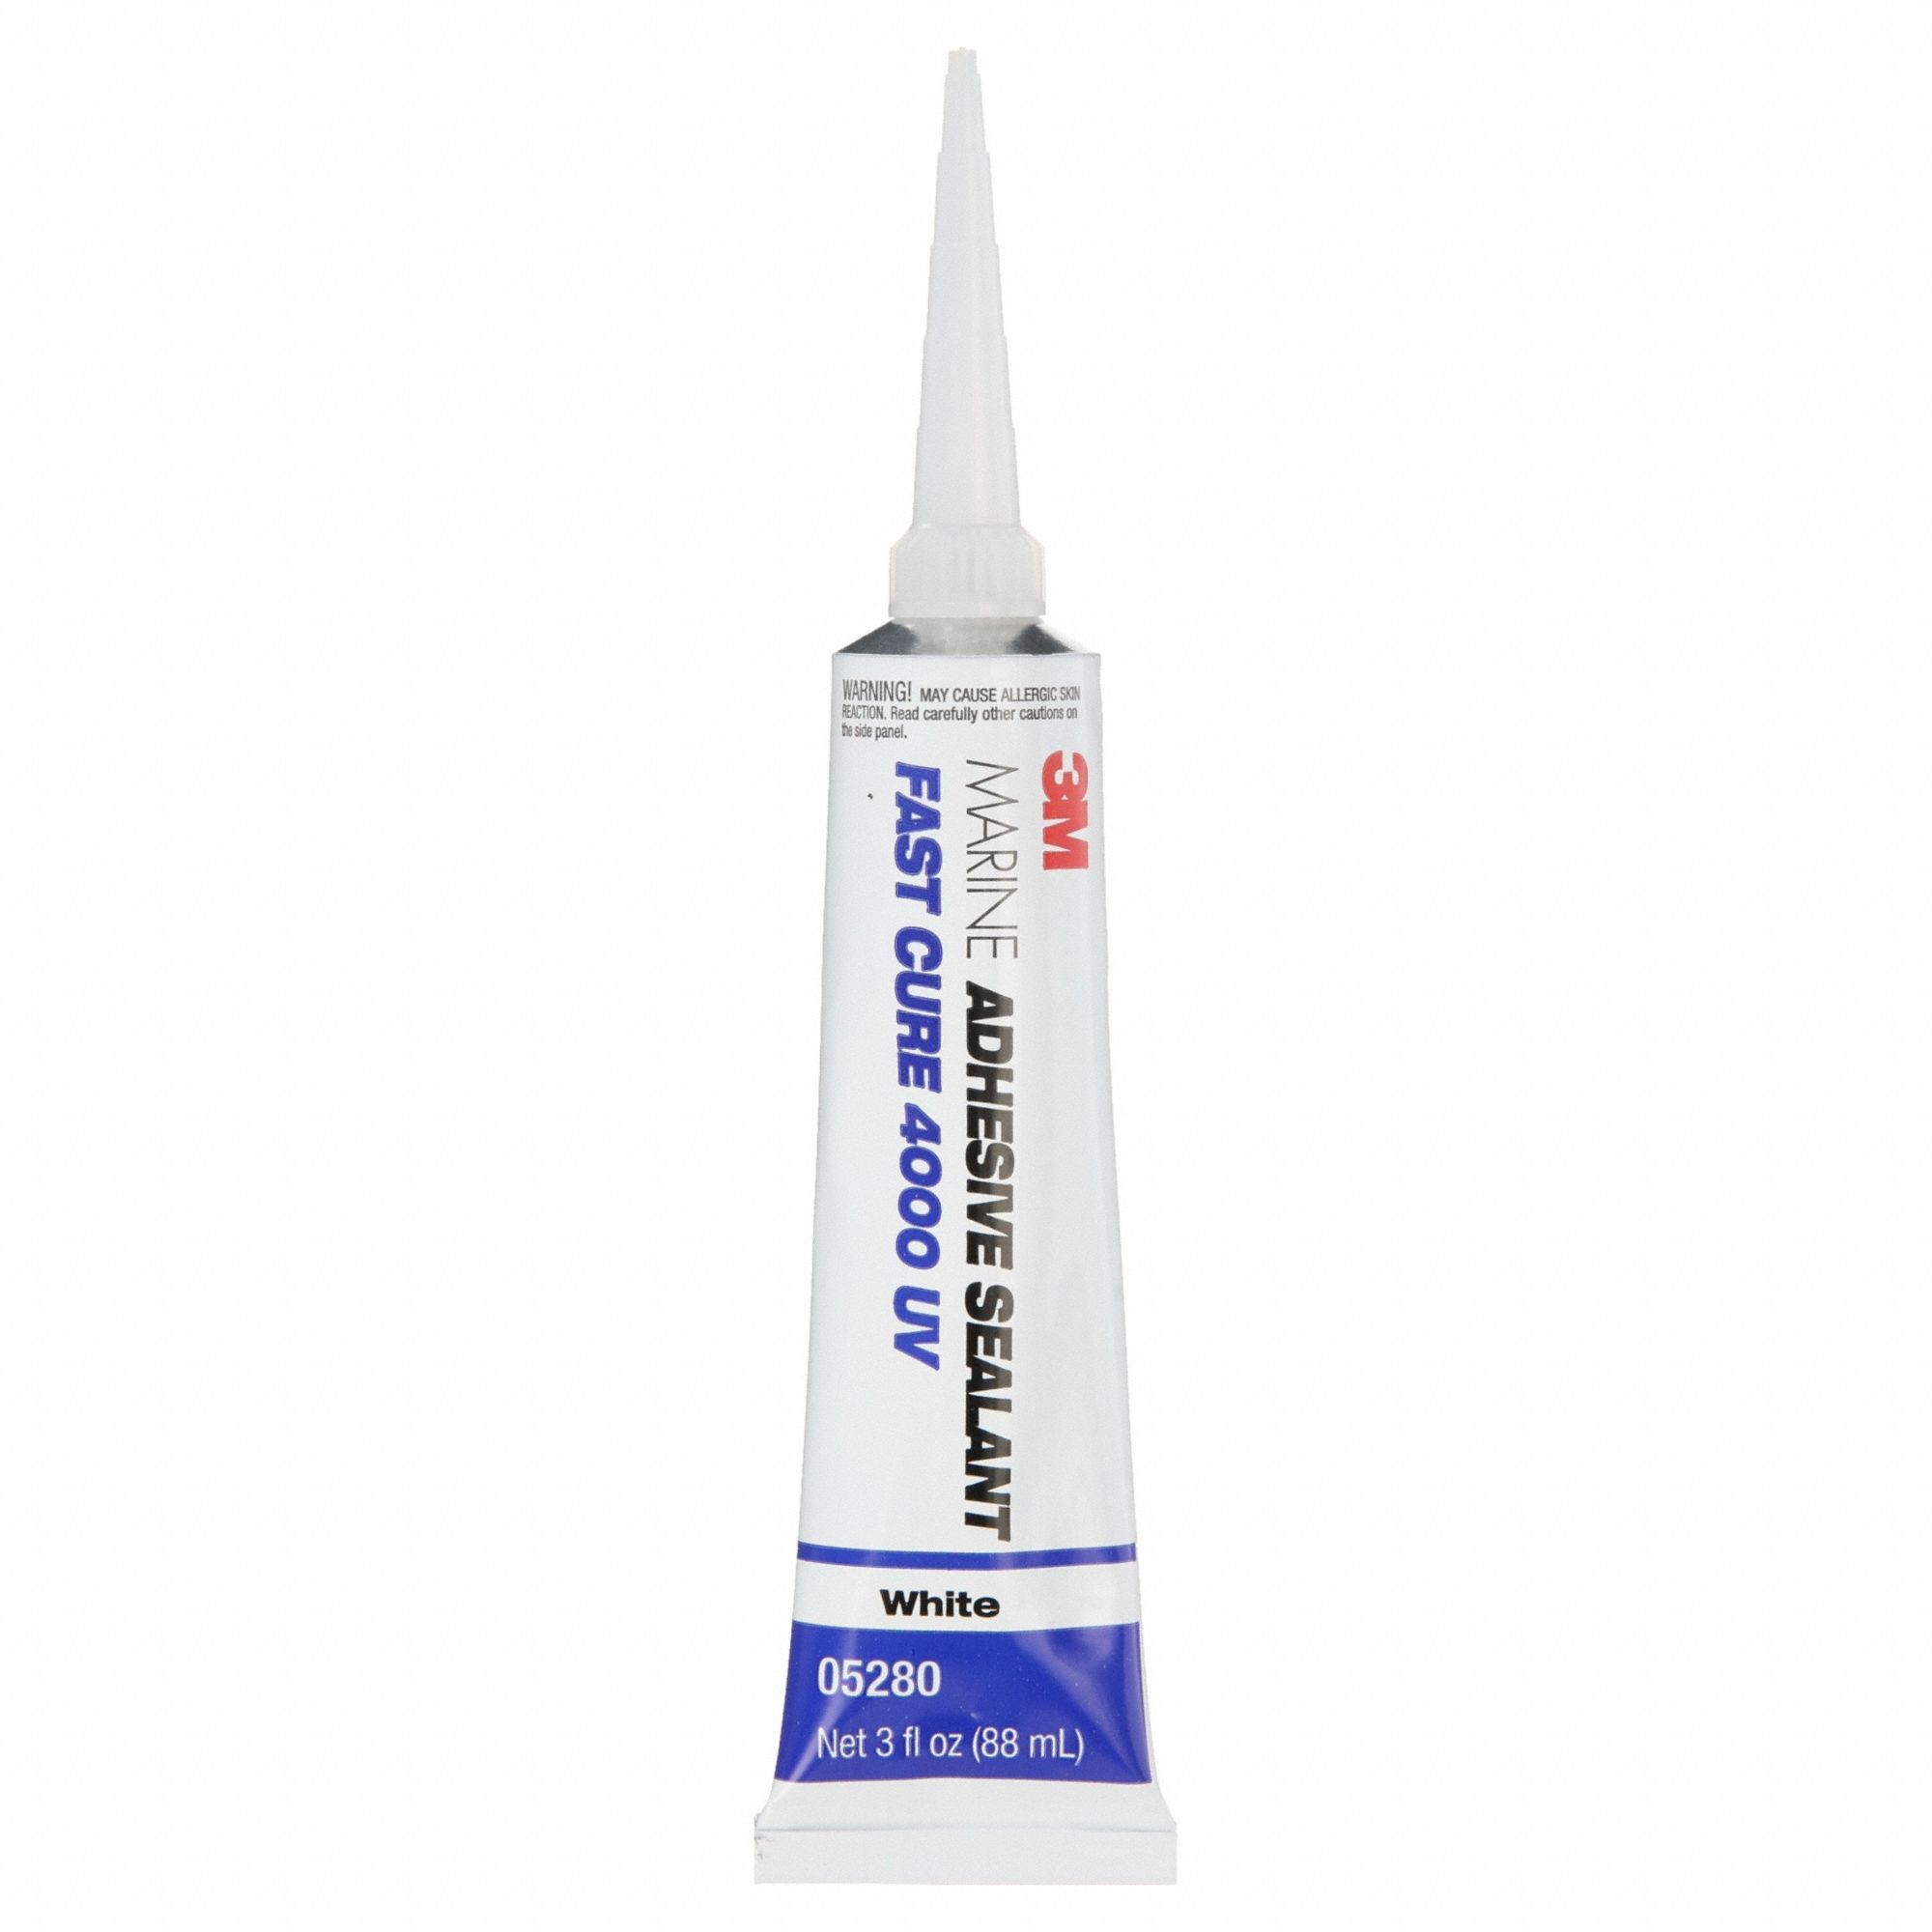 AS1803 White Thermally Conductive Adhesive Sealant